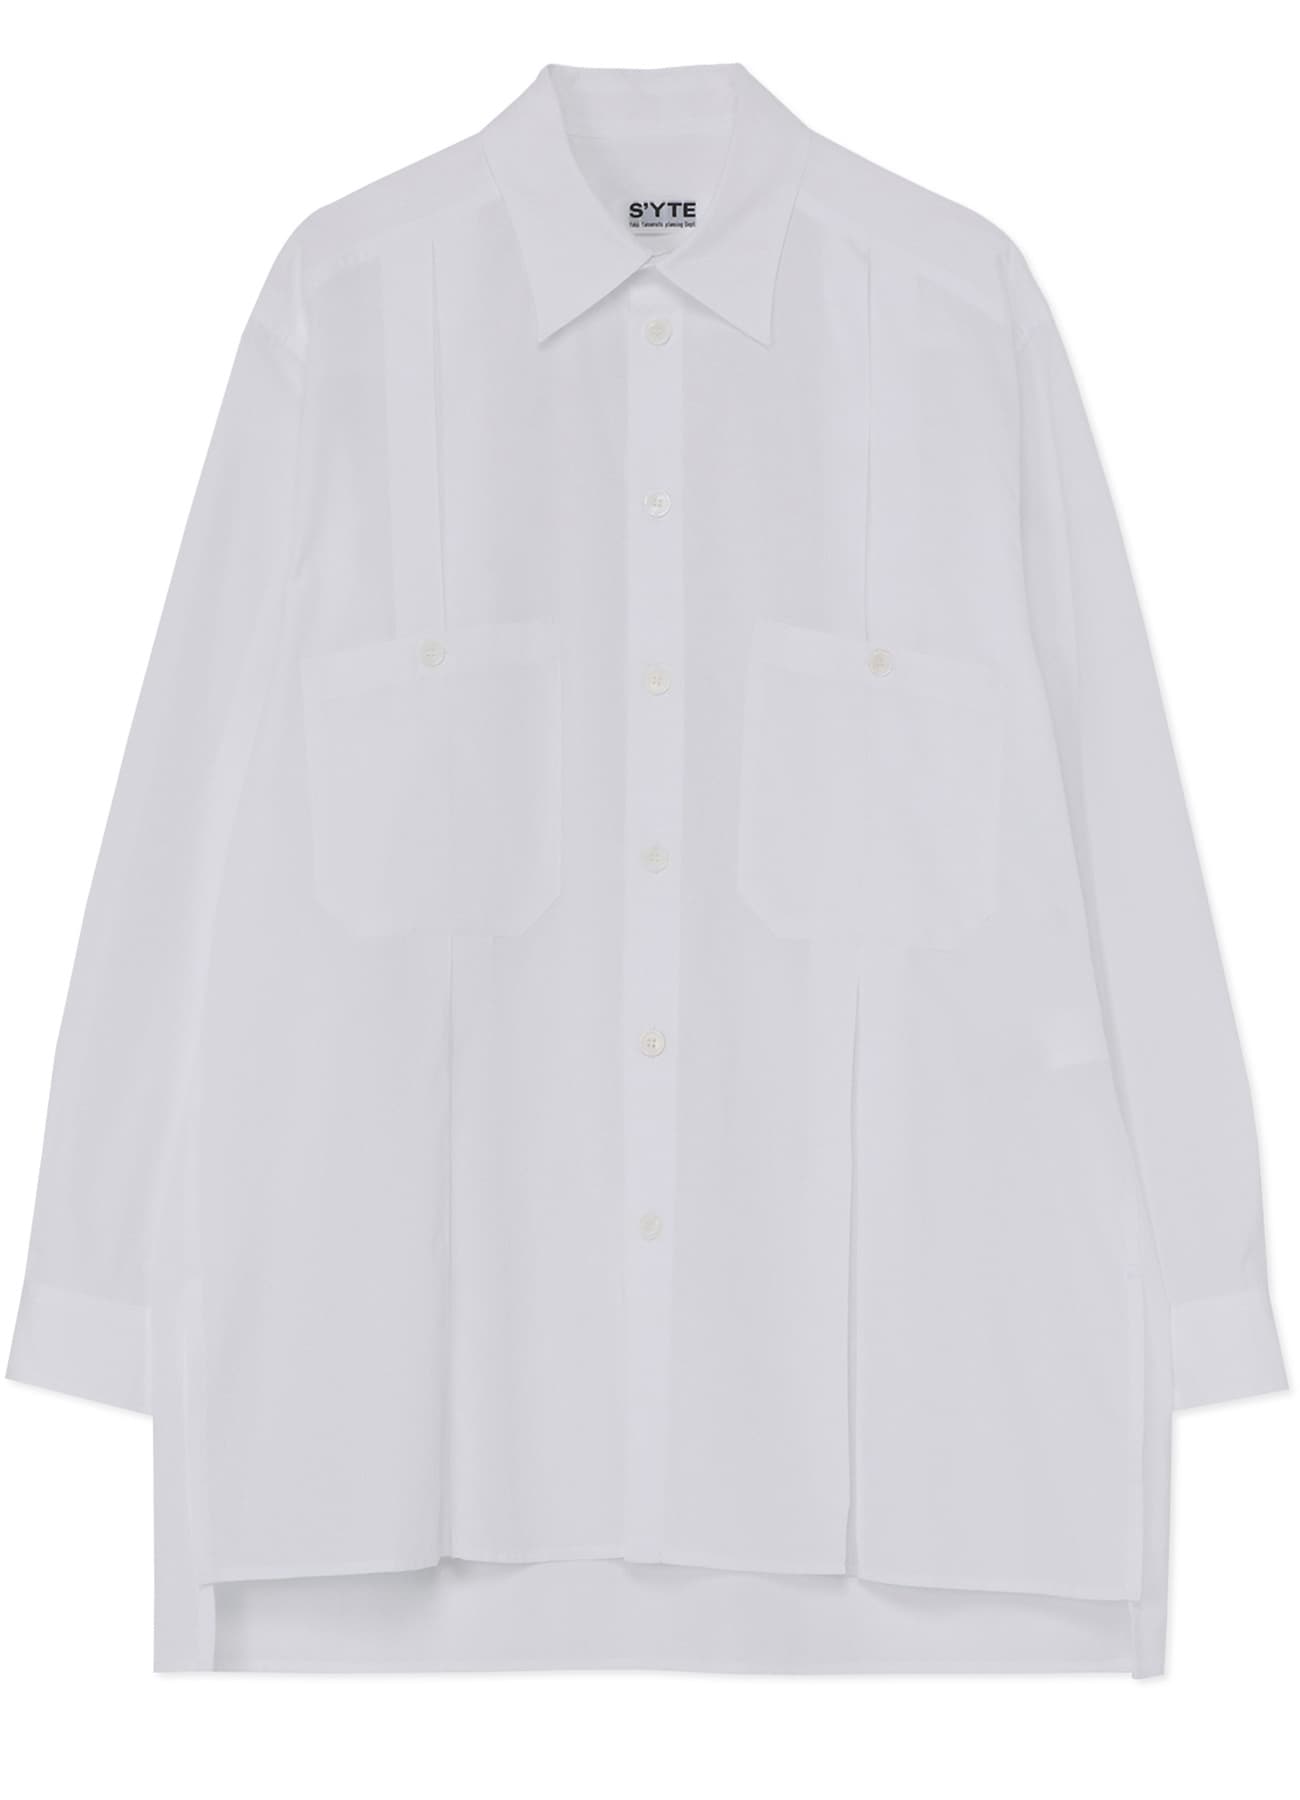 COTTON BROAD VERTICAL GUSSET SHIRTS(M White): S'YTE｜THE SHOP 